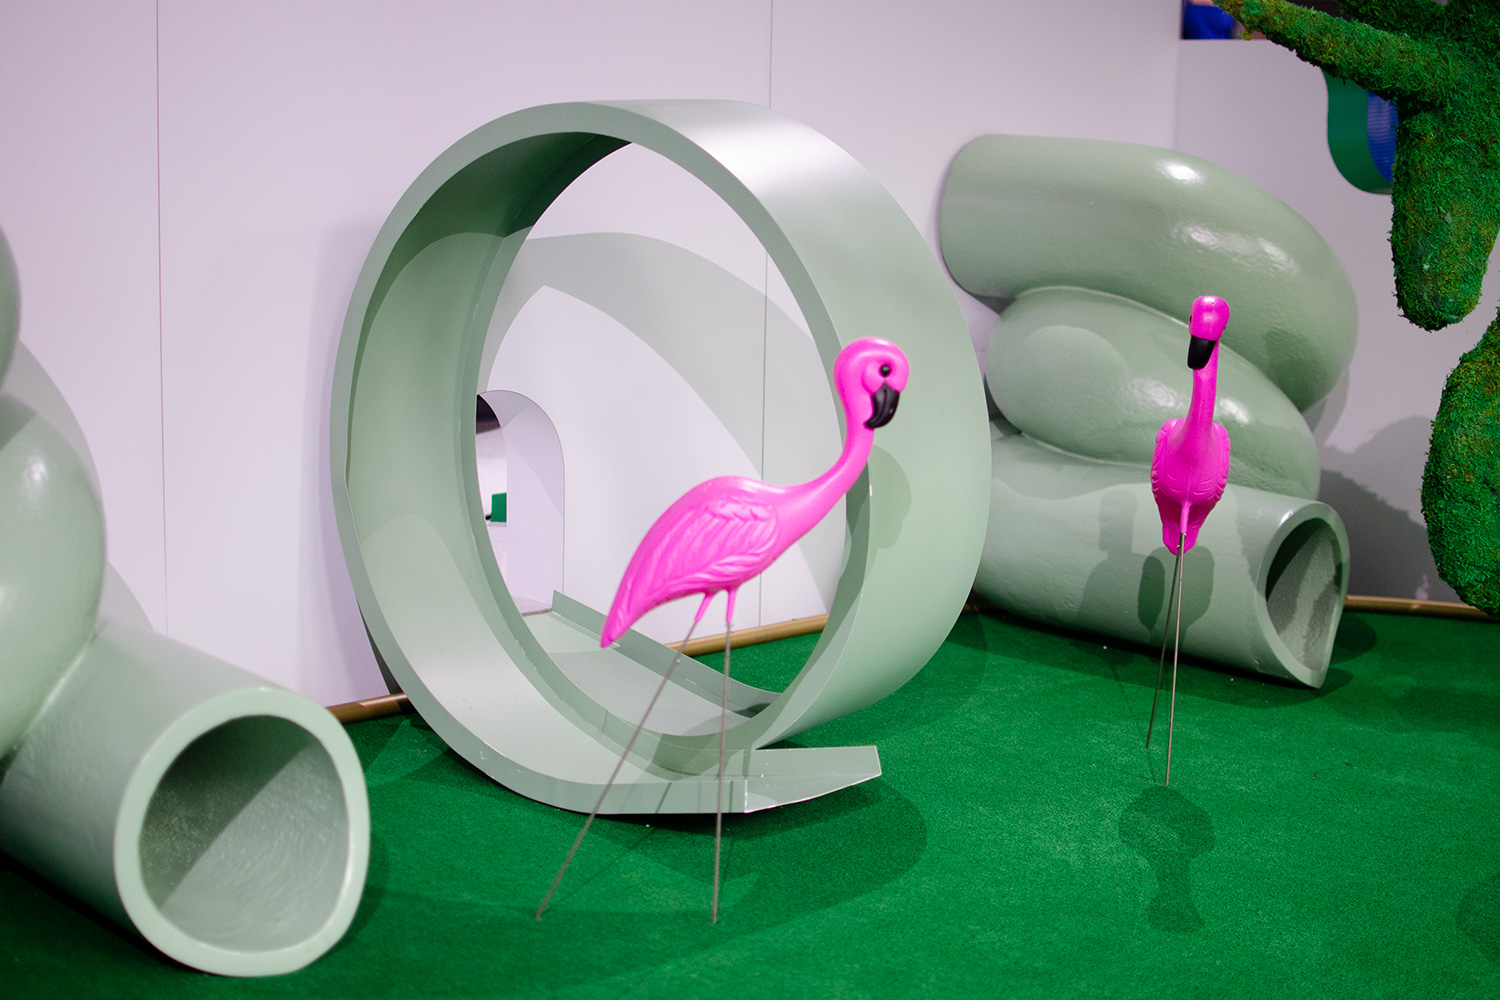 googles mini golf pop up event in nyc highlights its smart home products google flamingos